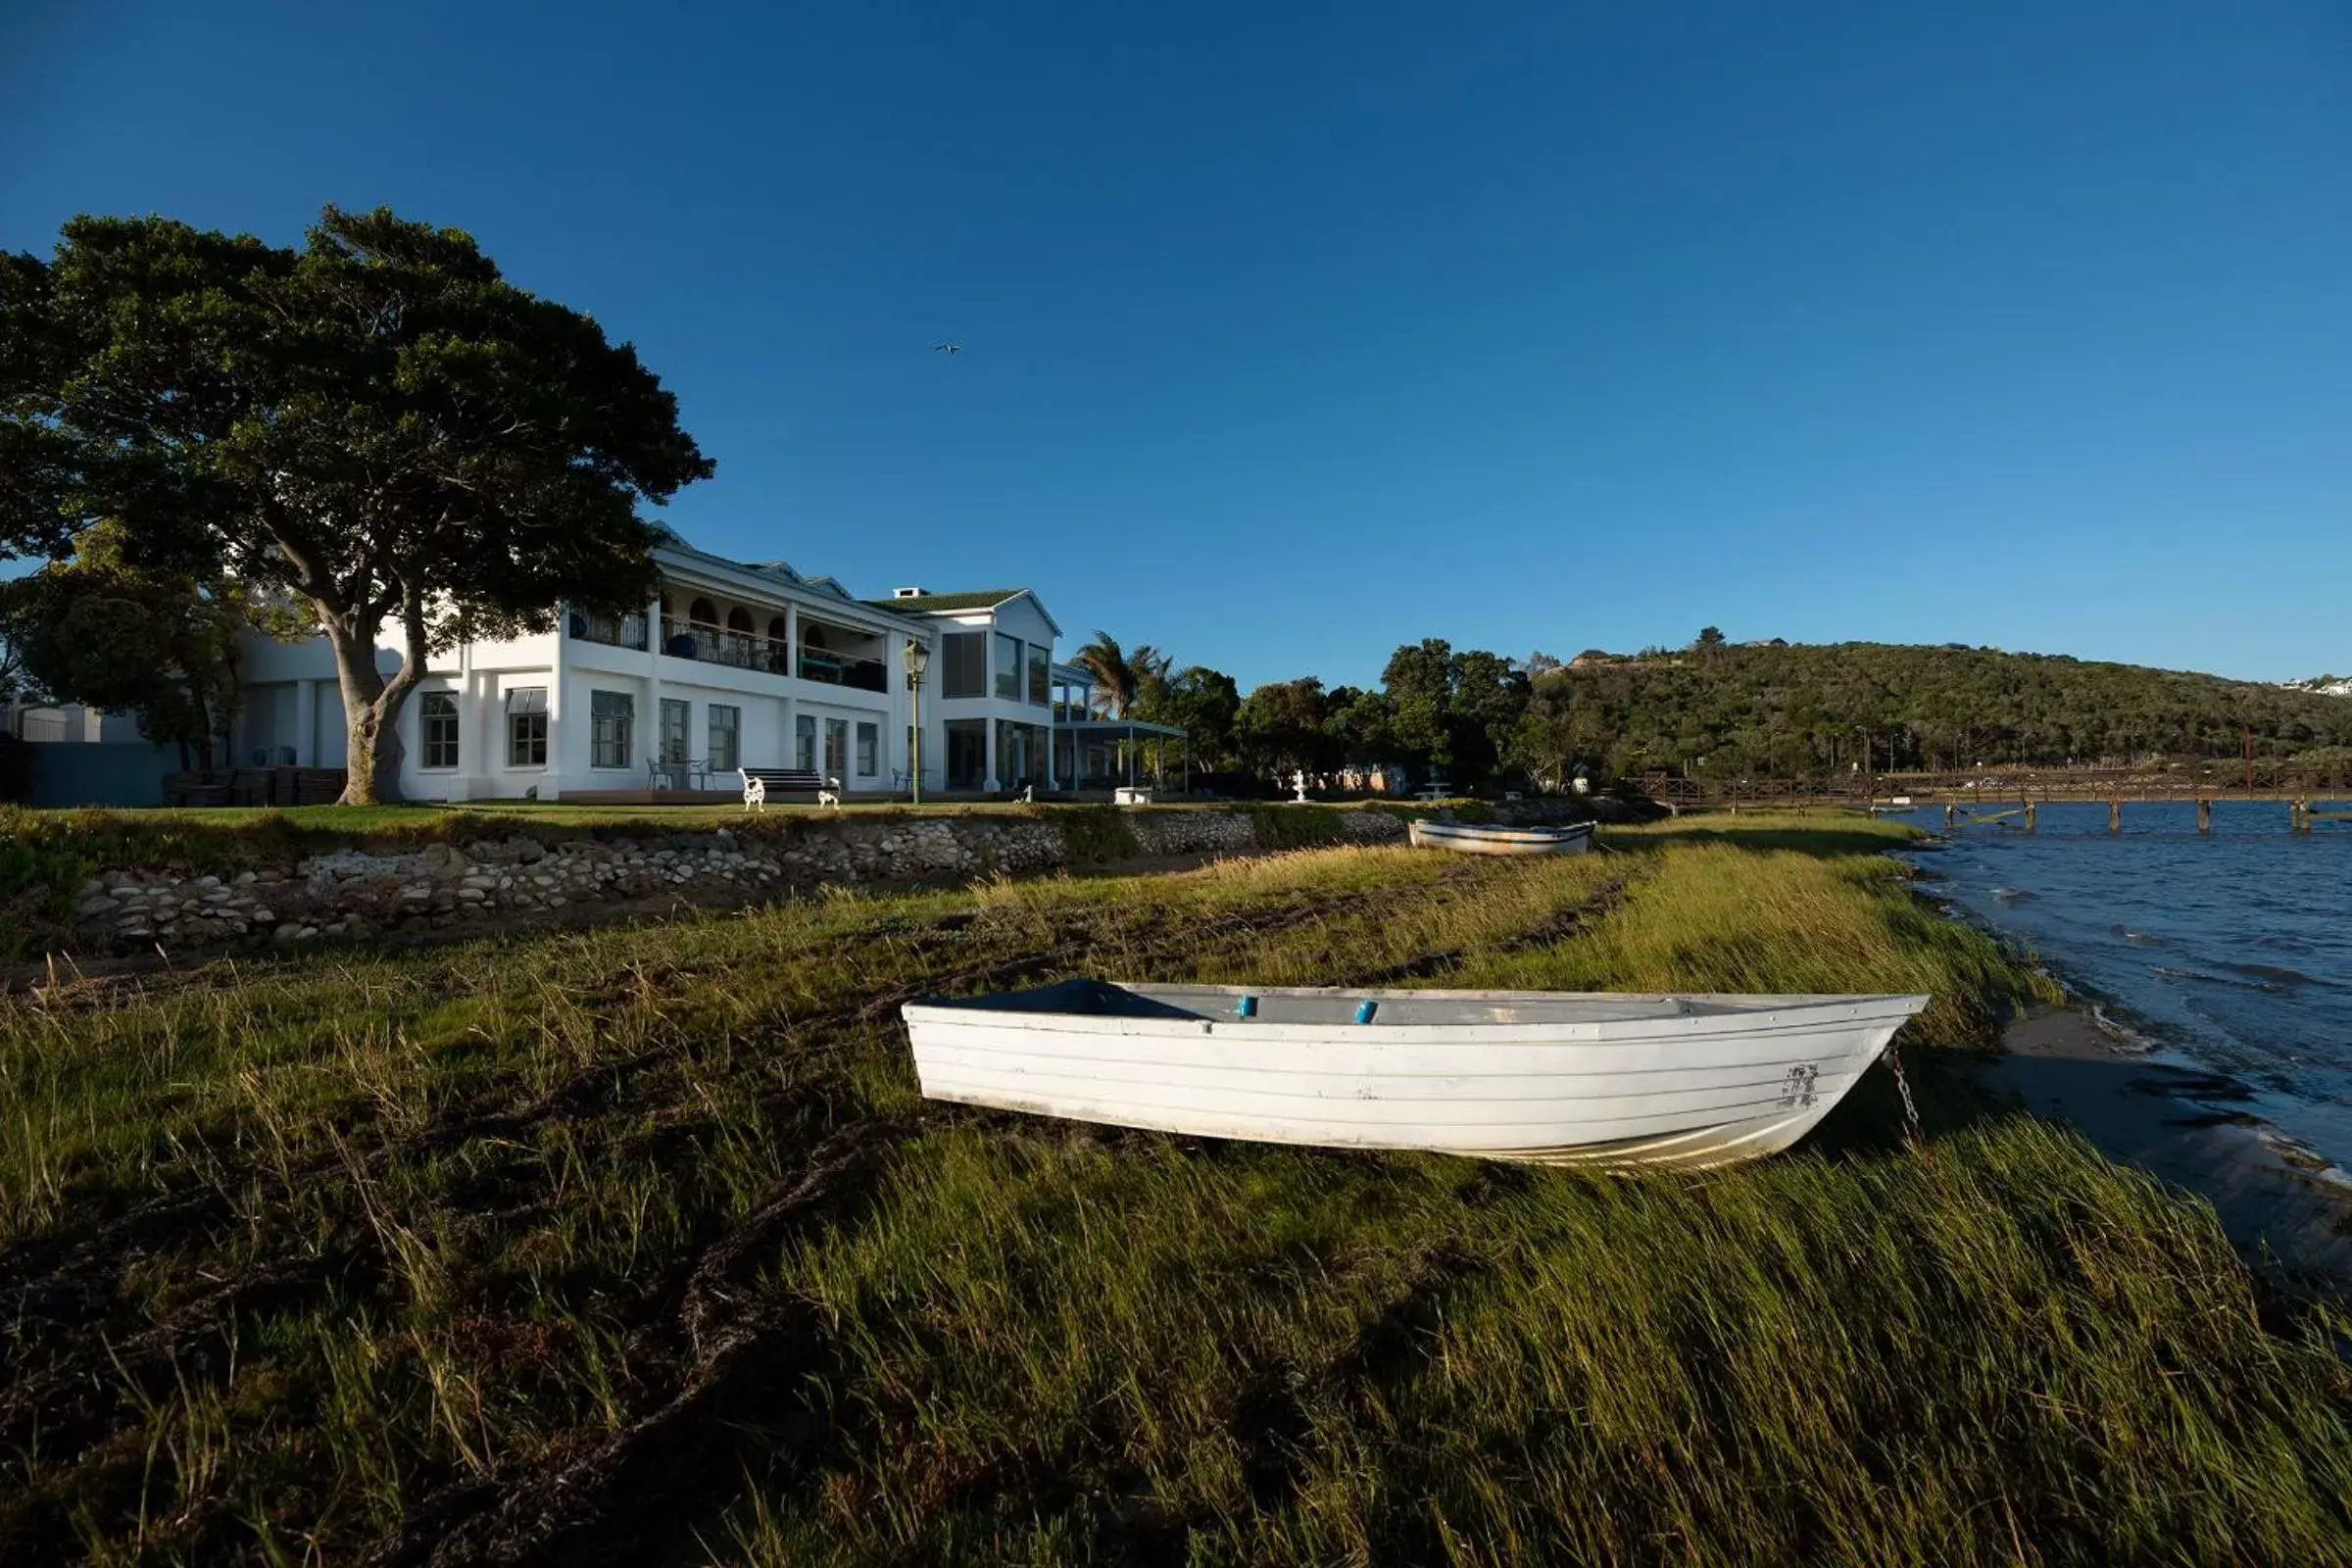 Property building in St. James of Knysna